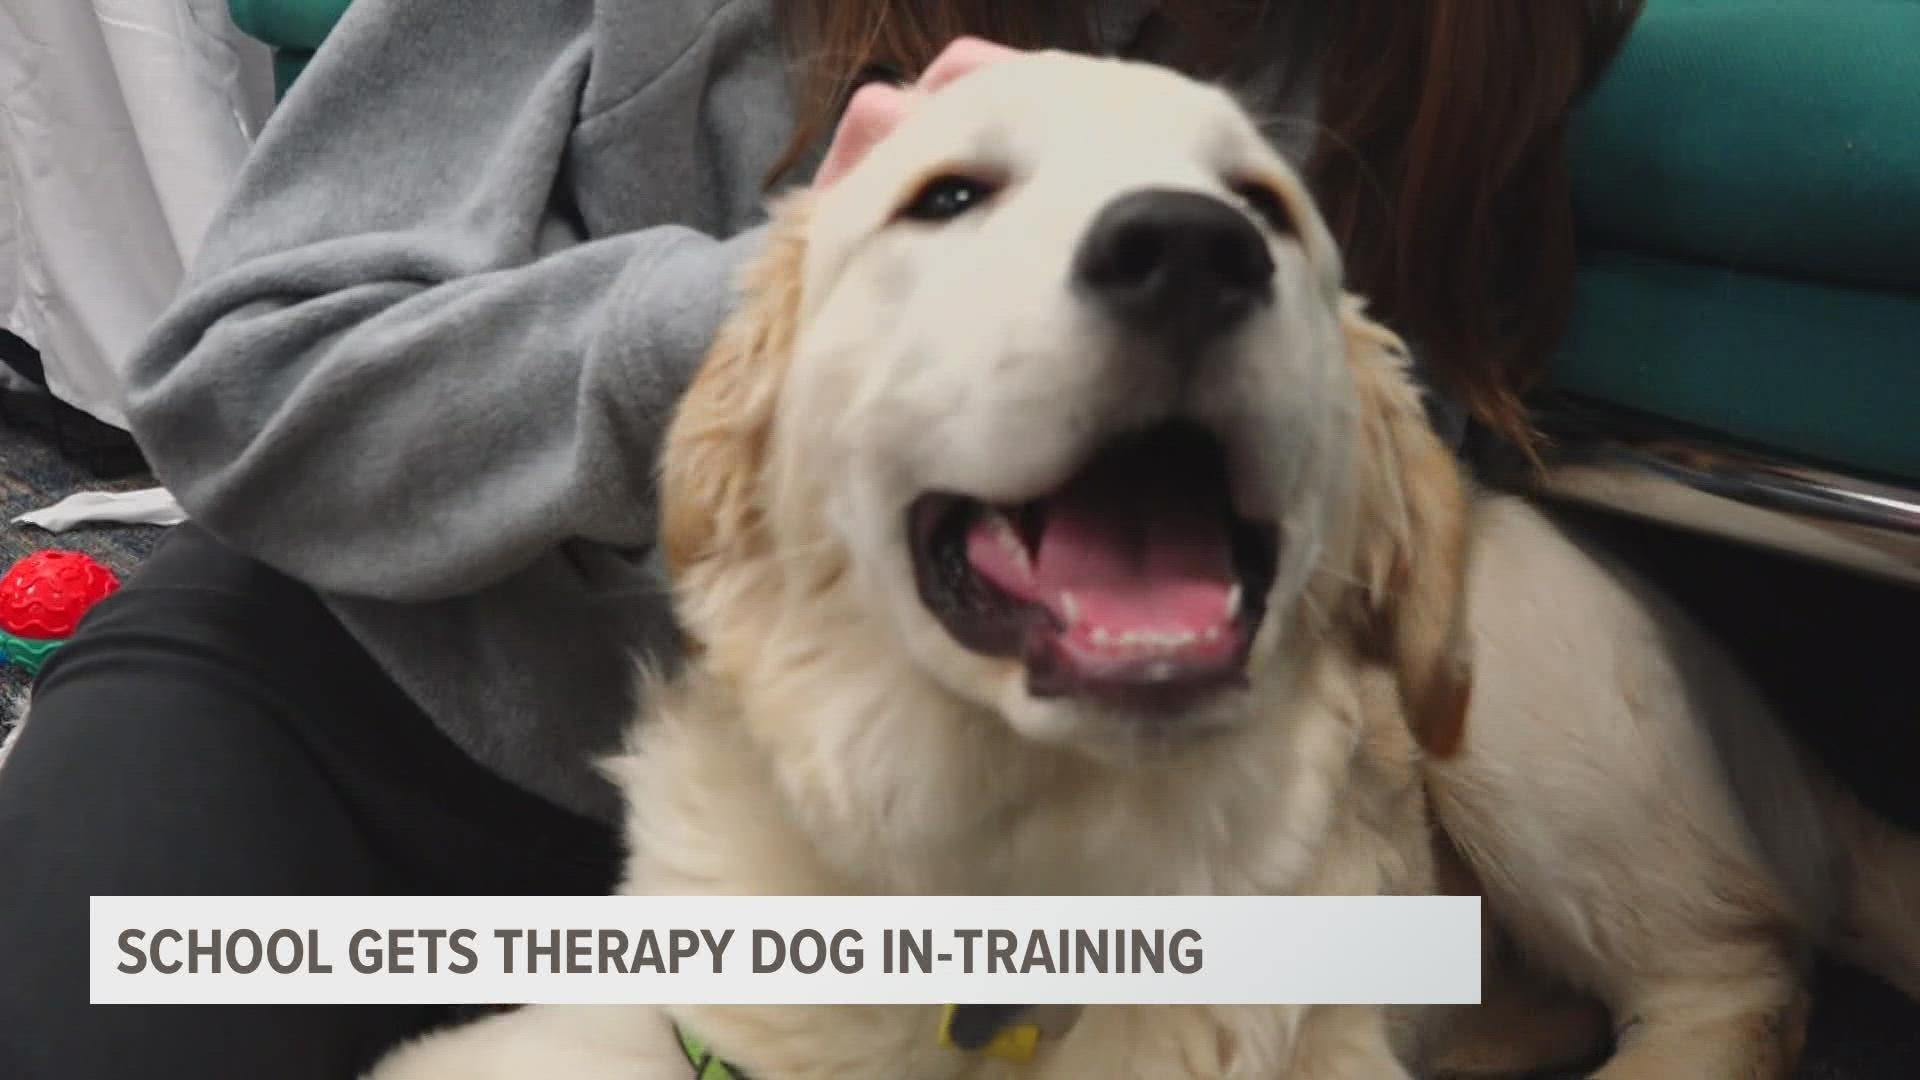 Holland school welcomes therapy dog in-training 